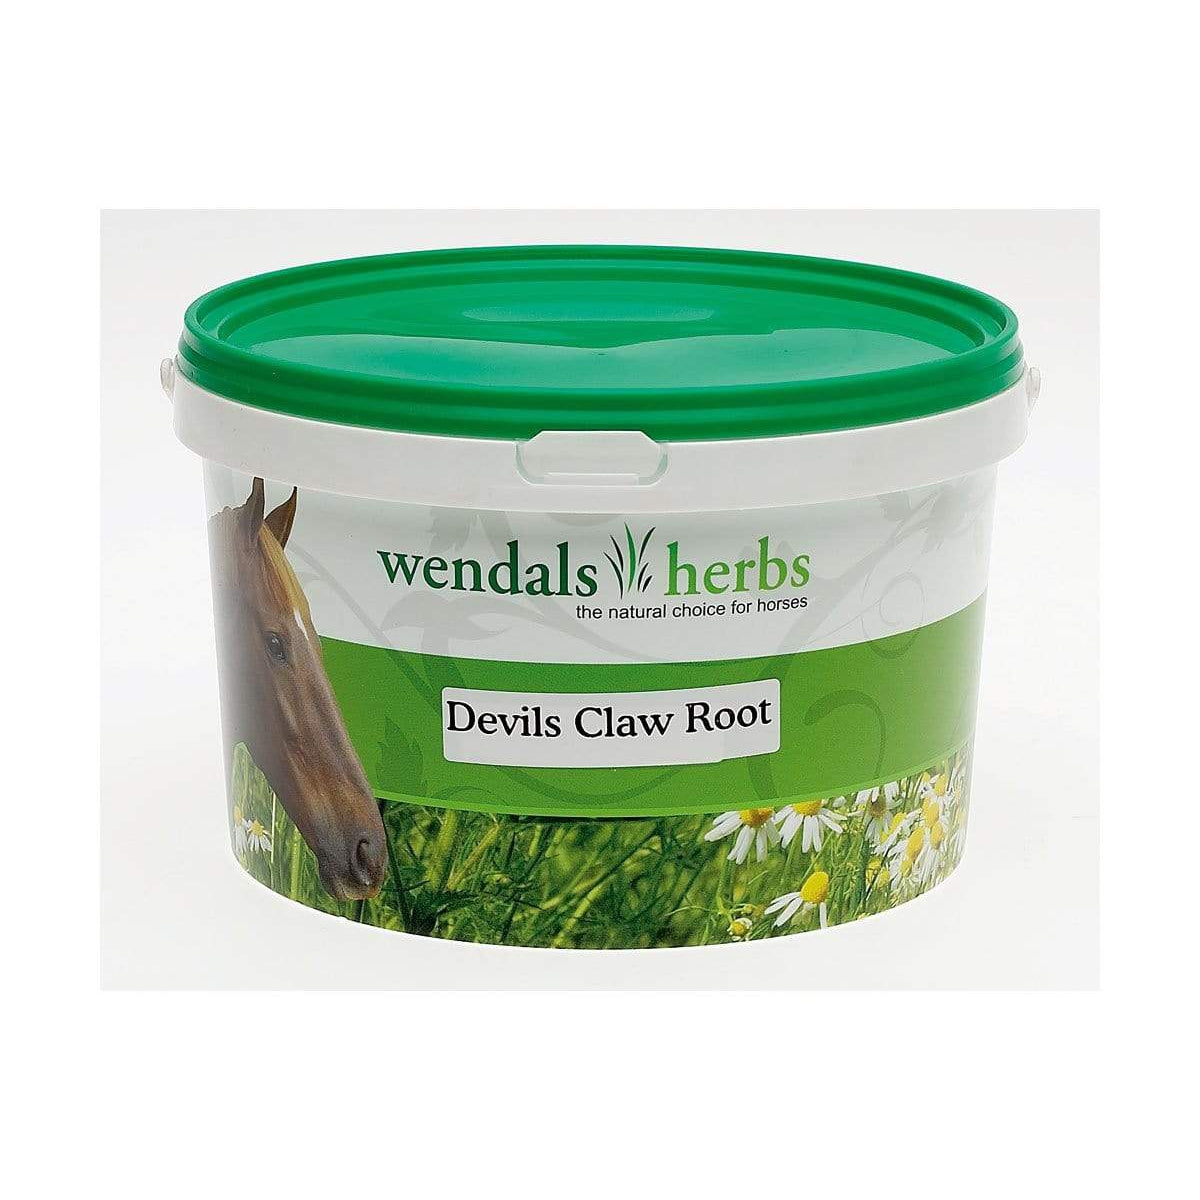 Wendals Herbs Devils Claw Root